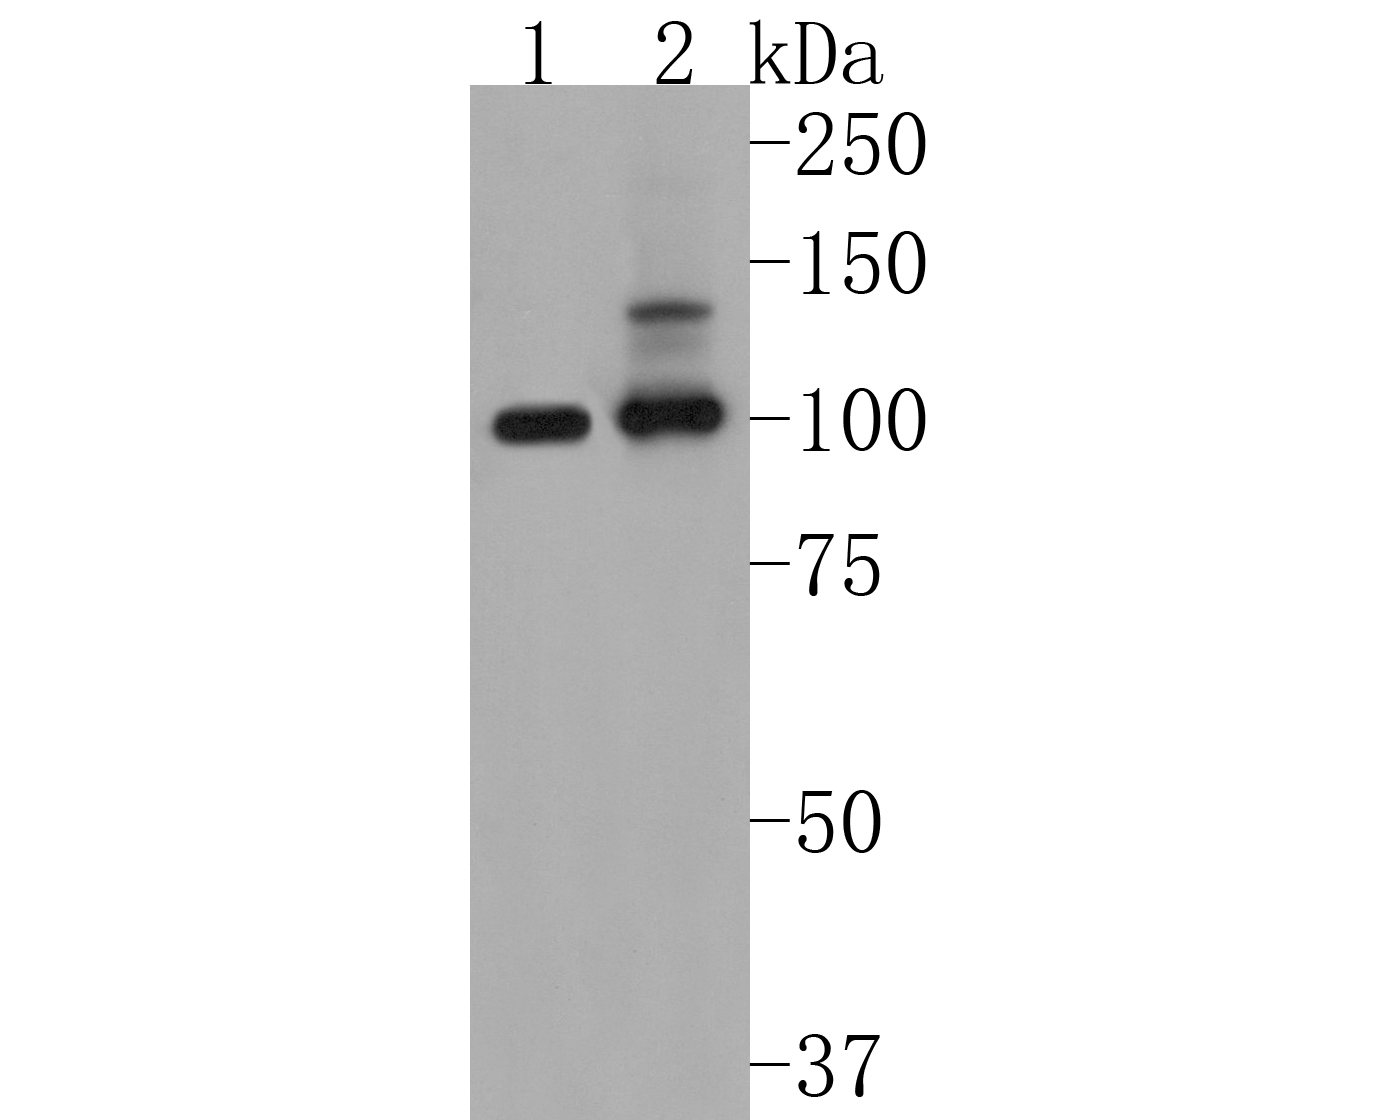 Western blot analysis of PSD93 on different lysates. Proteins were transferred to a PVDF membrane and blocked with 5% BSA in PBS for 1 hour at room temperature. The primary antibody (ET1705-90, 1/500) was used in 5% BSA at room temperature for 2 hours. Goat Anti-Rabbit IgG - HRP Secondary Antibody (HA1001) at 1:5,000 dilution was used for 1 hour at room temperature.<br />
Positive control: <br />
Lane 1: Hela cell lysate<br />
Lane 2: SH-SY5Y cell lysate